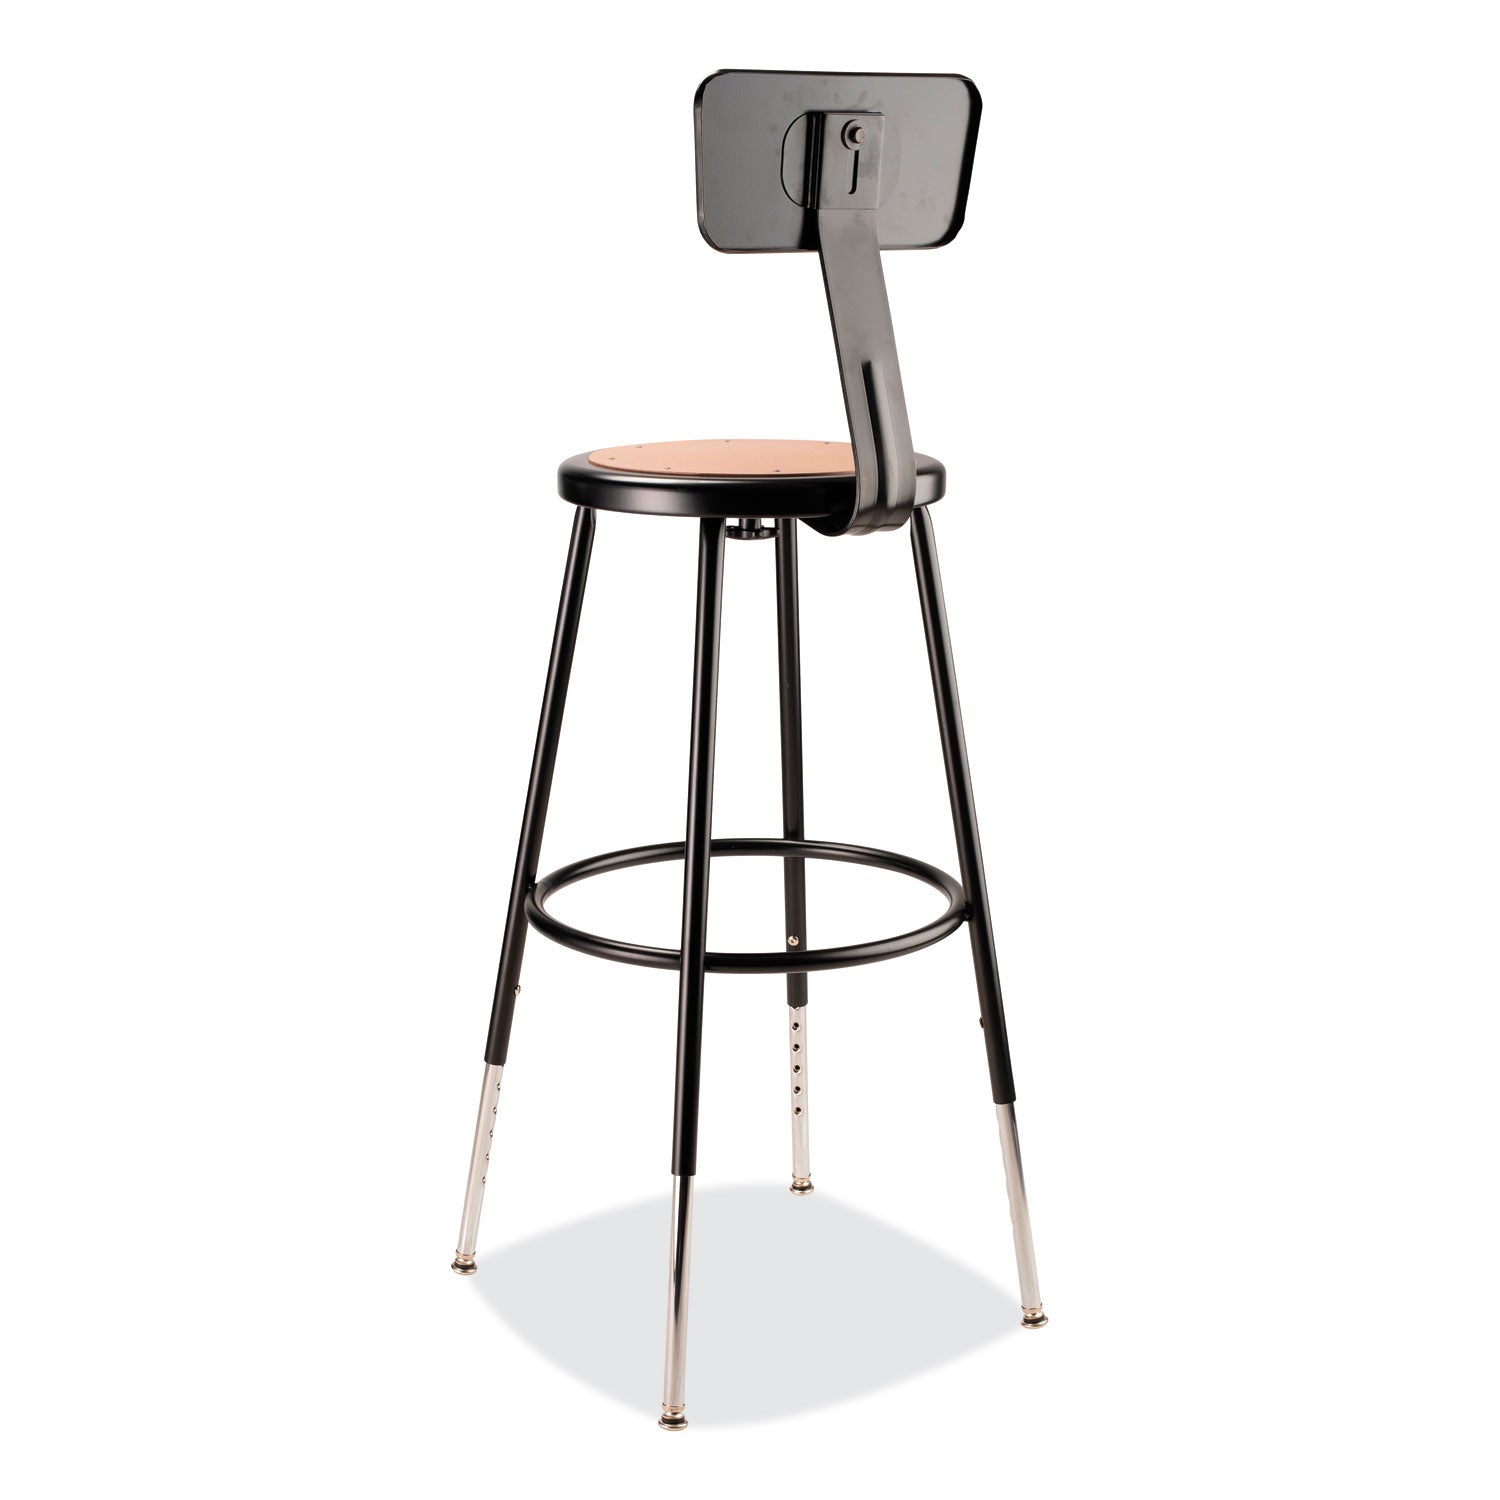 6200-series-25-33-height-adj-heavy-duty-stool-with-backrest-supports-500-lb-brown-seat-black-base-ships-in-1-3-bus-days_nps6224hb10 - 4